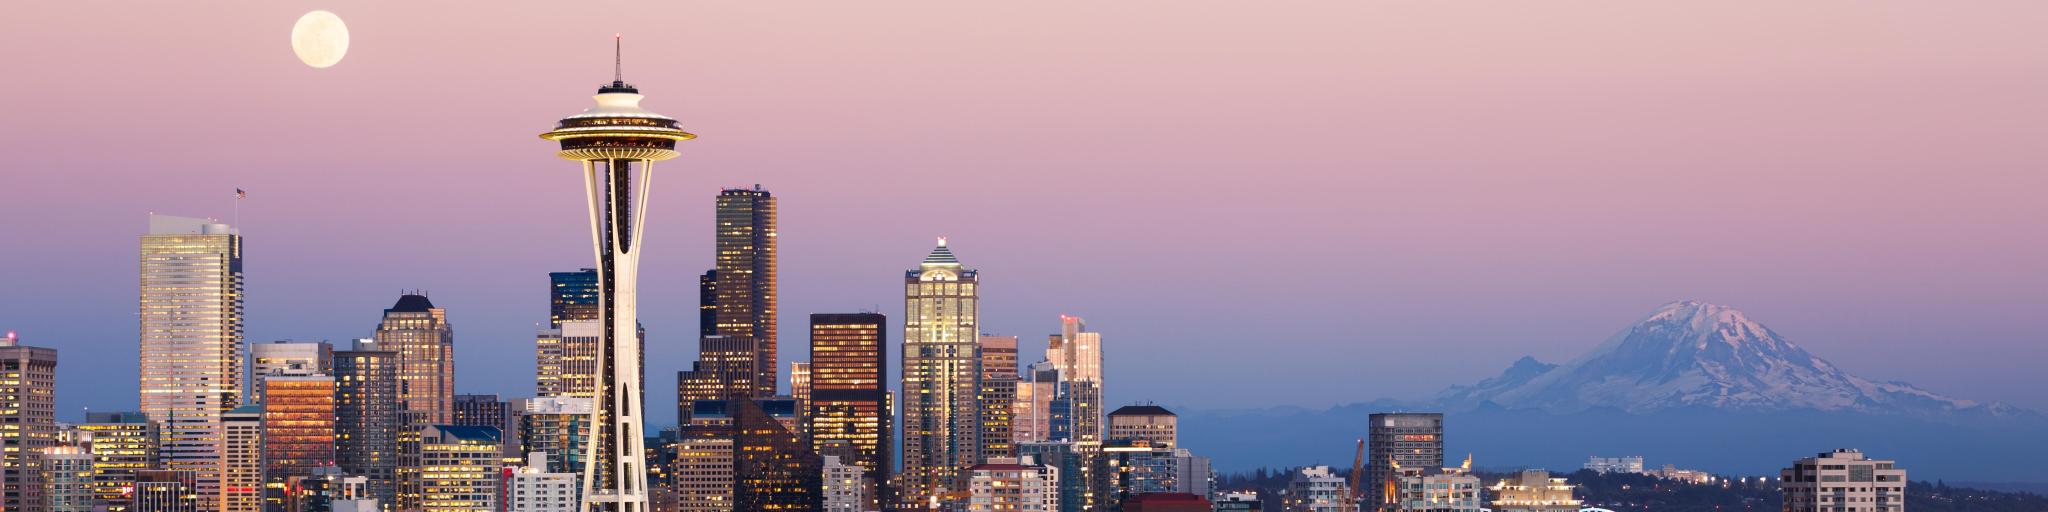 Seattle skyline at dusk with Mt Rainier in the background